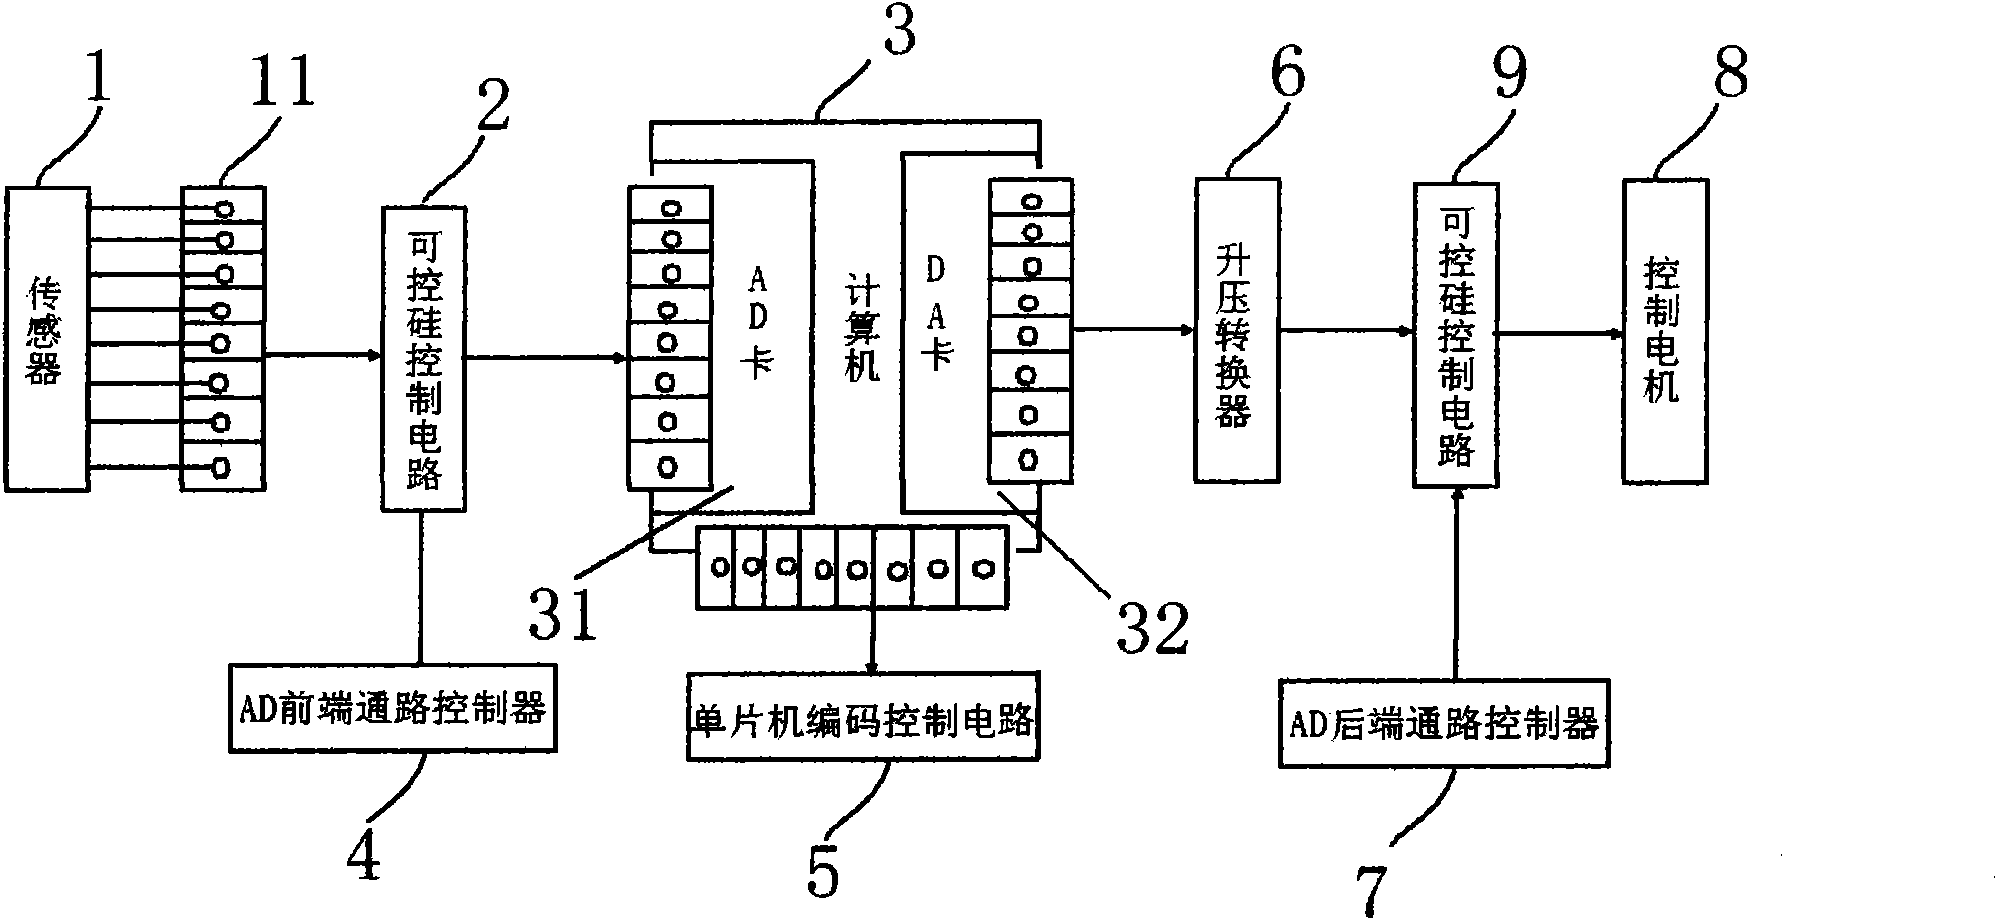 Steel structure performance measurement and control circuit system based on piezoelectric principal element rod piece